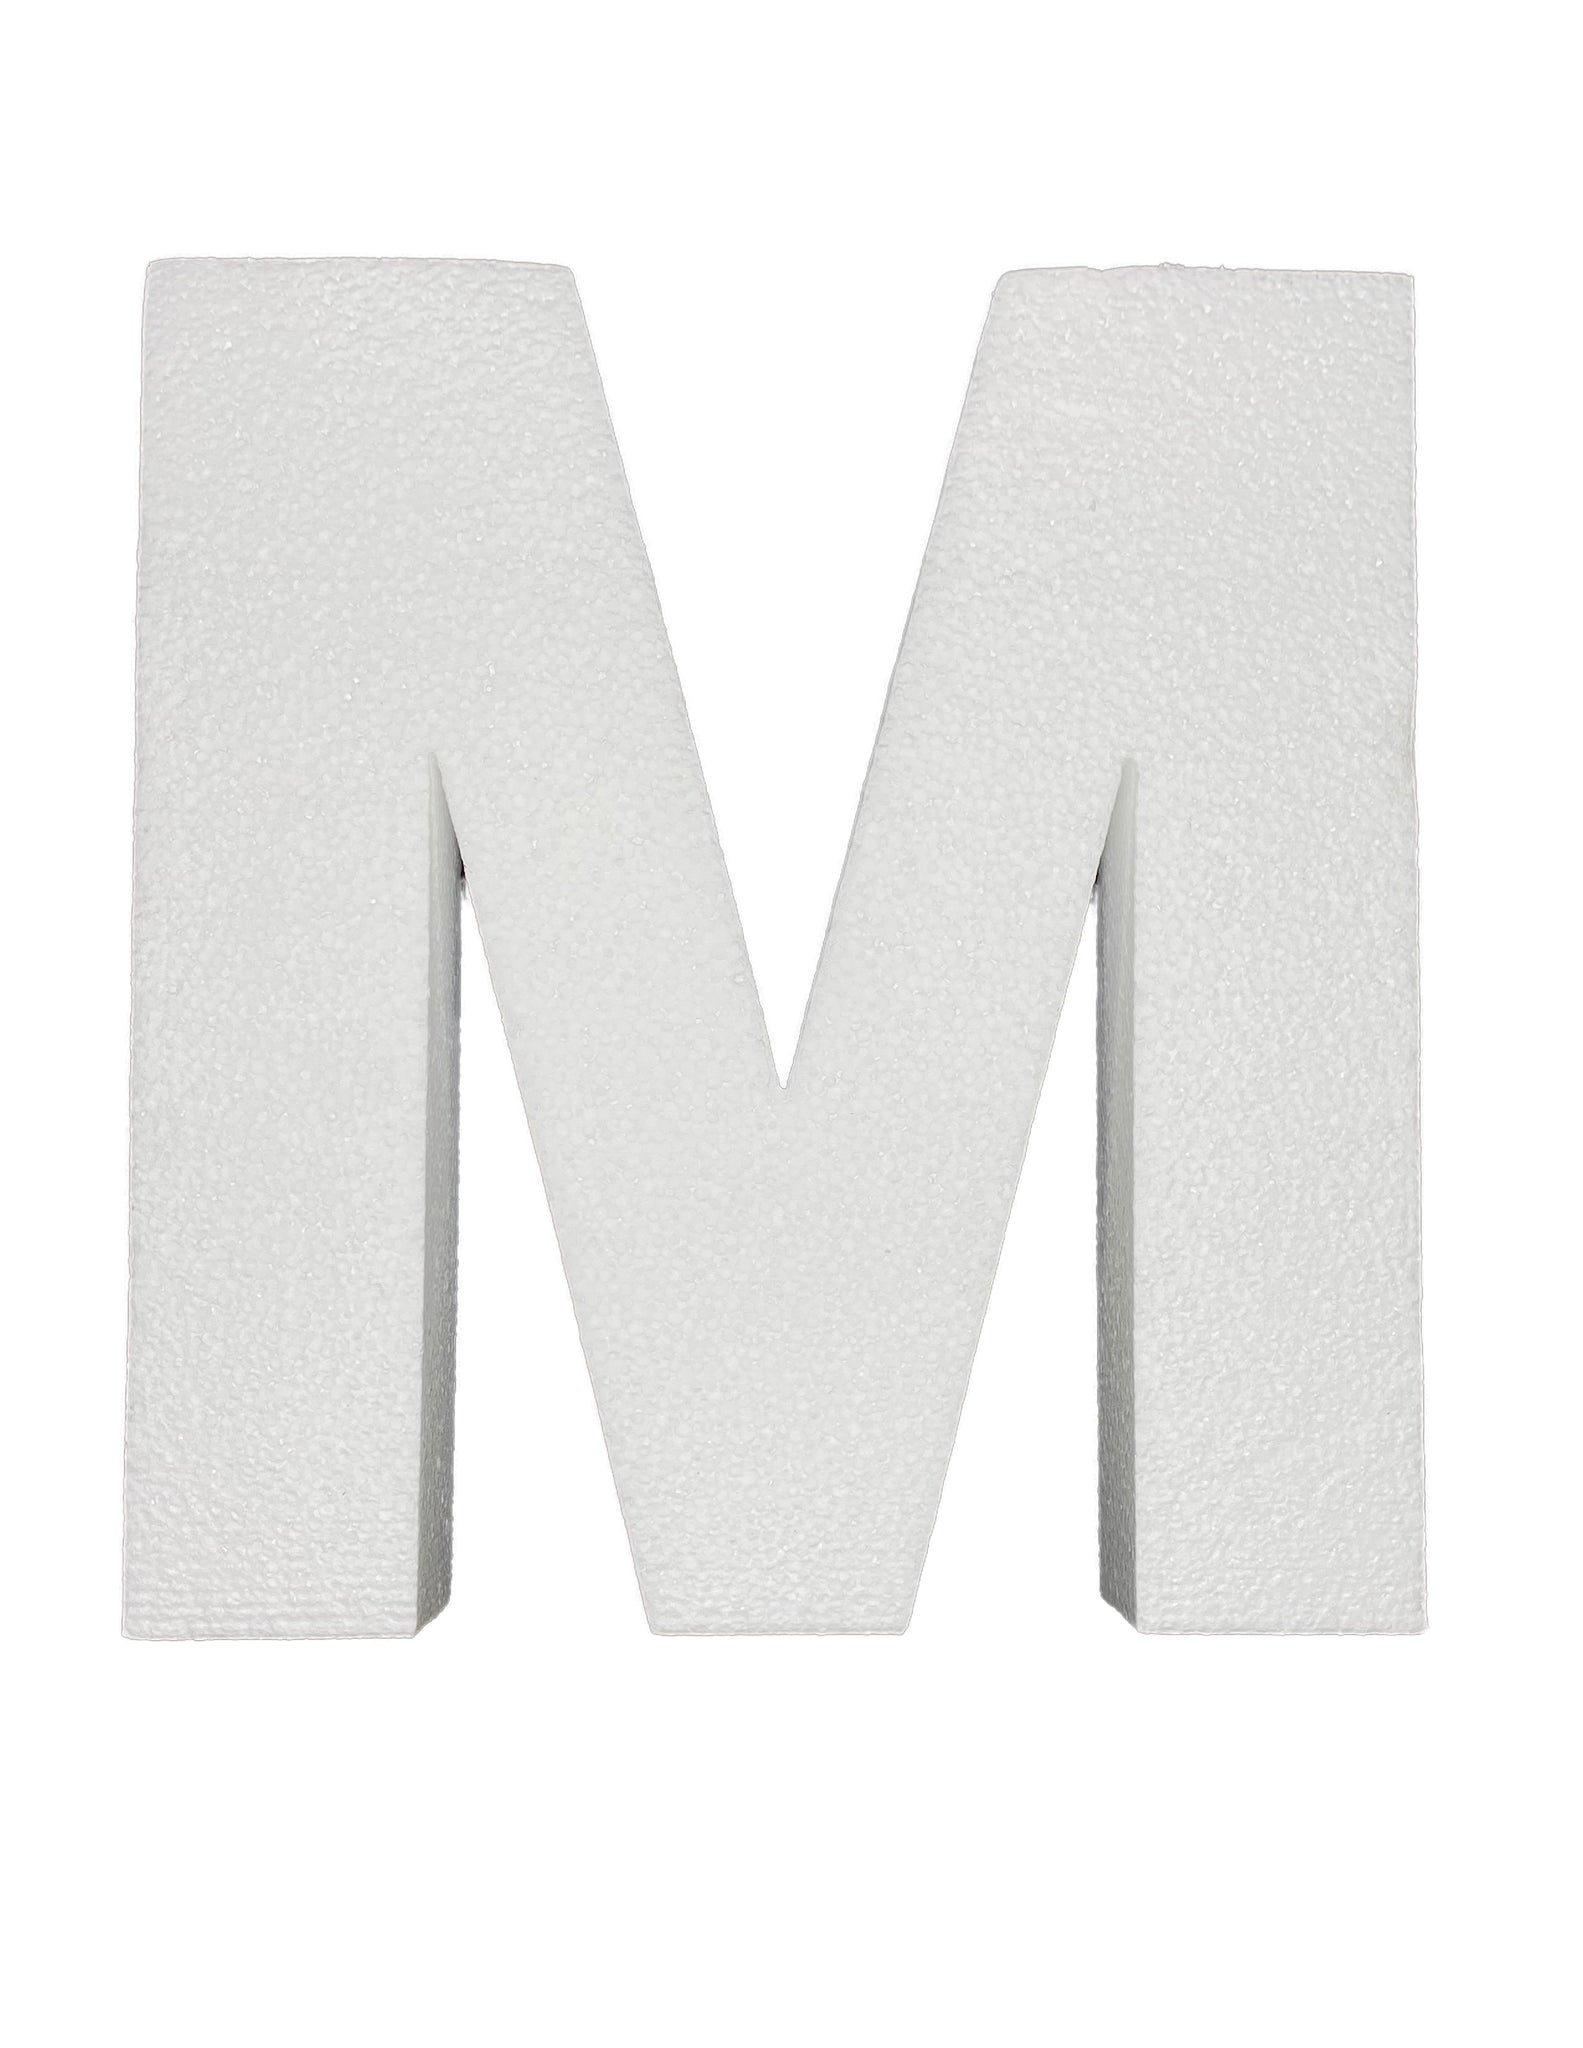 12 Inch Smooth Foam Letters - Great for Arts and Craft & DIY A-Z –